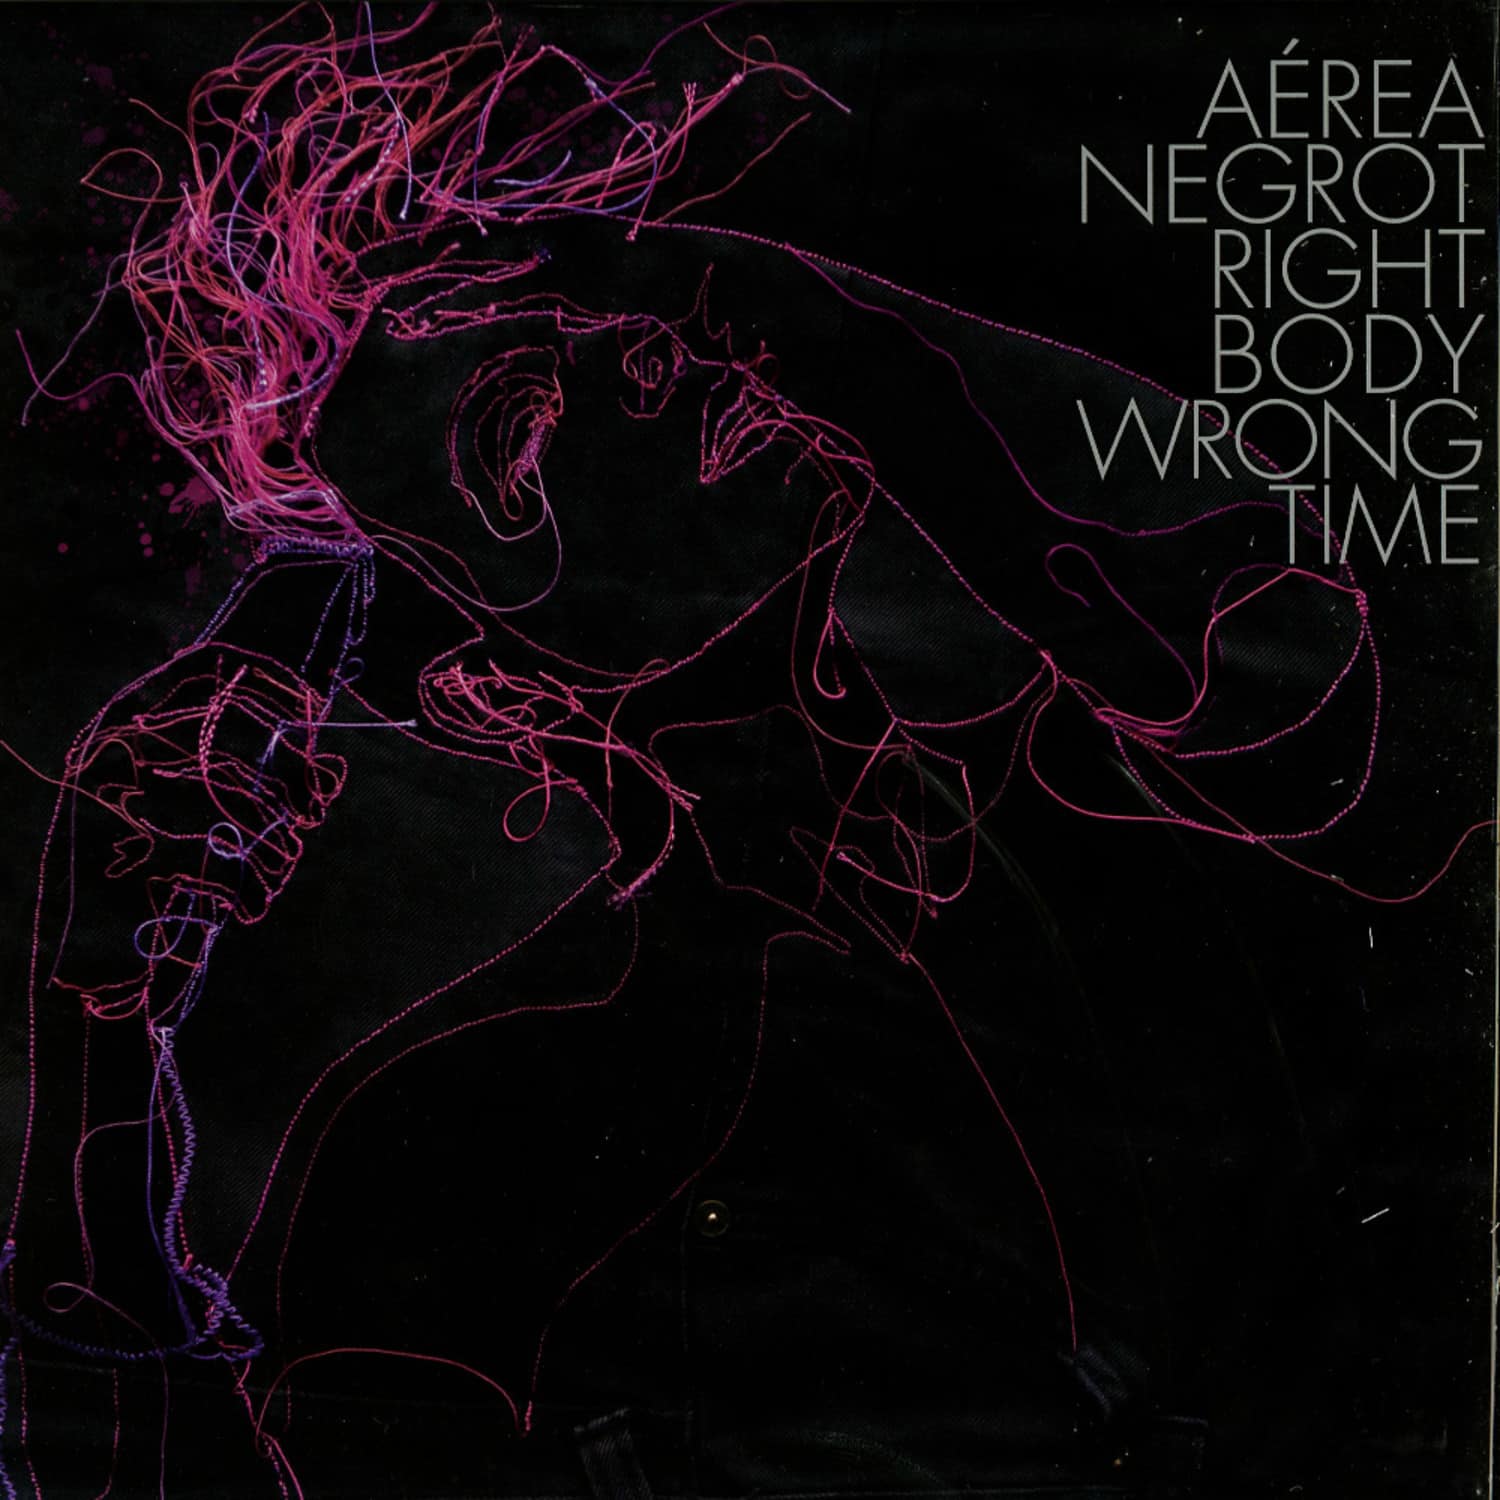 Aerea Negrot - RIGHT BODY, WRONG TIME